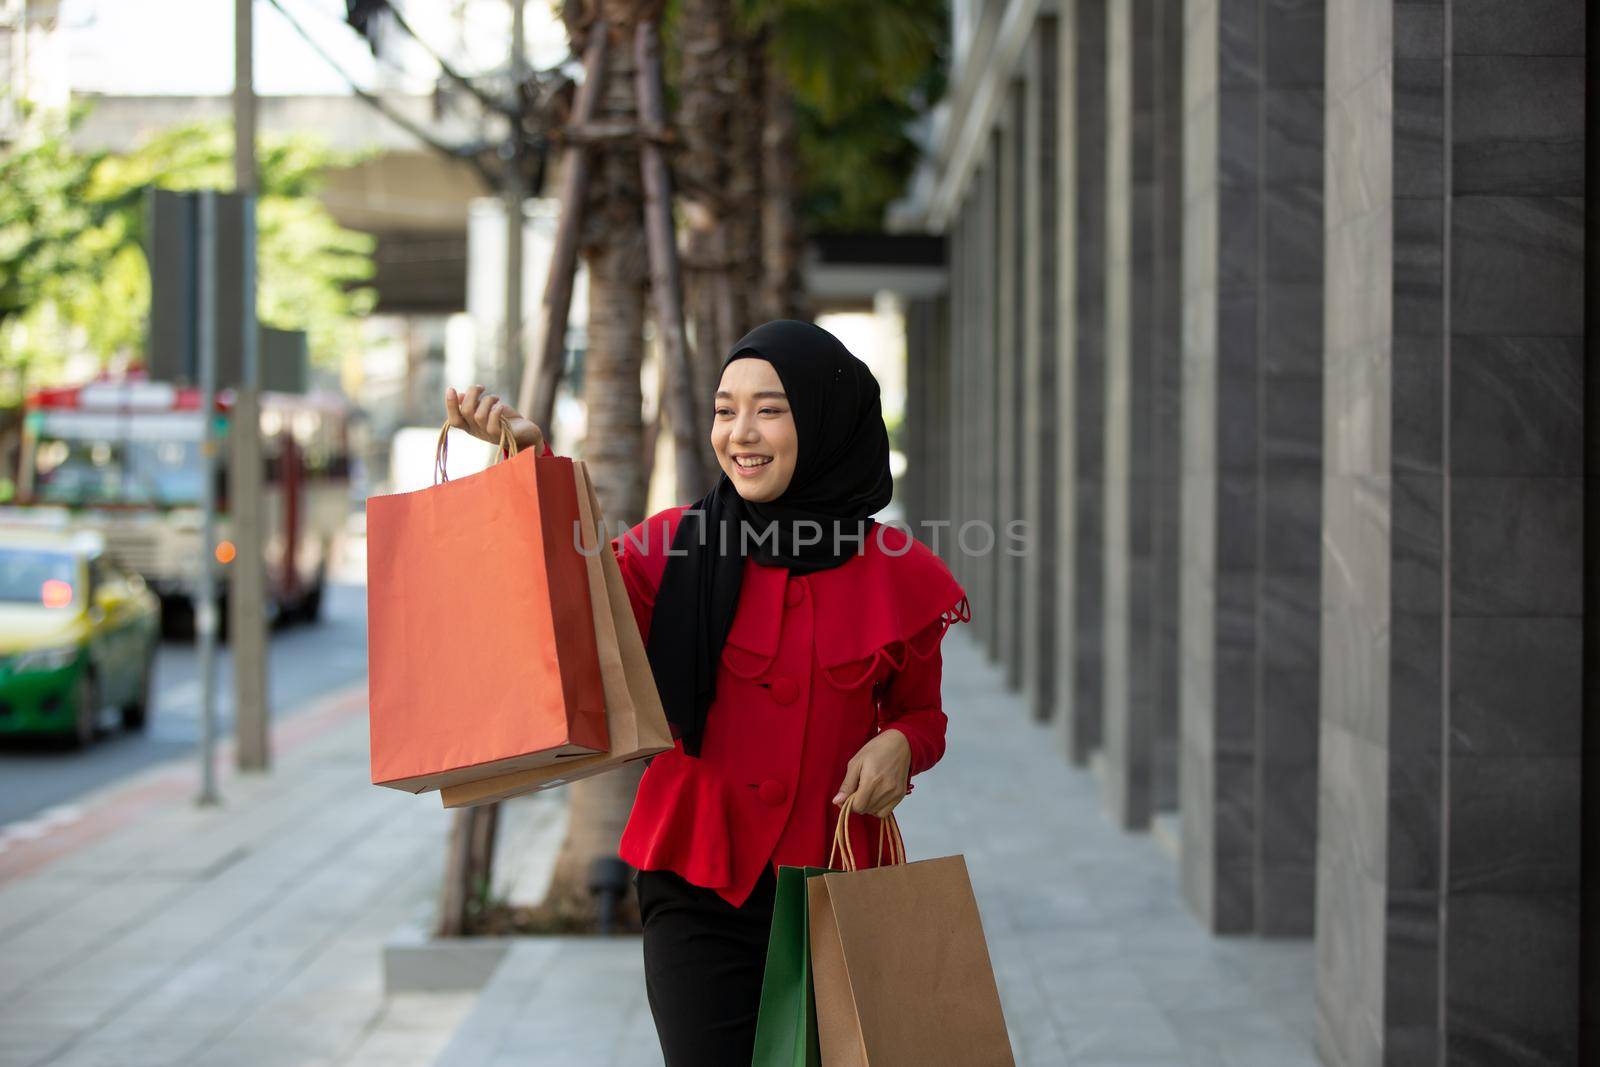 Woman with Shopping Bags